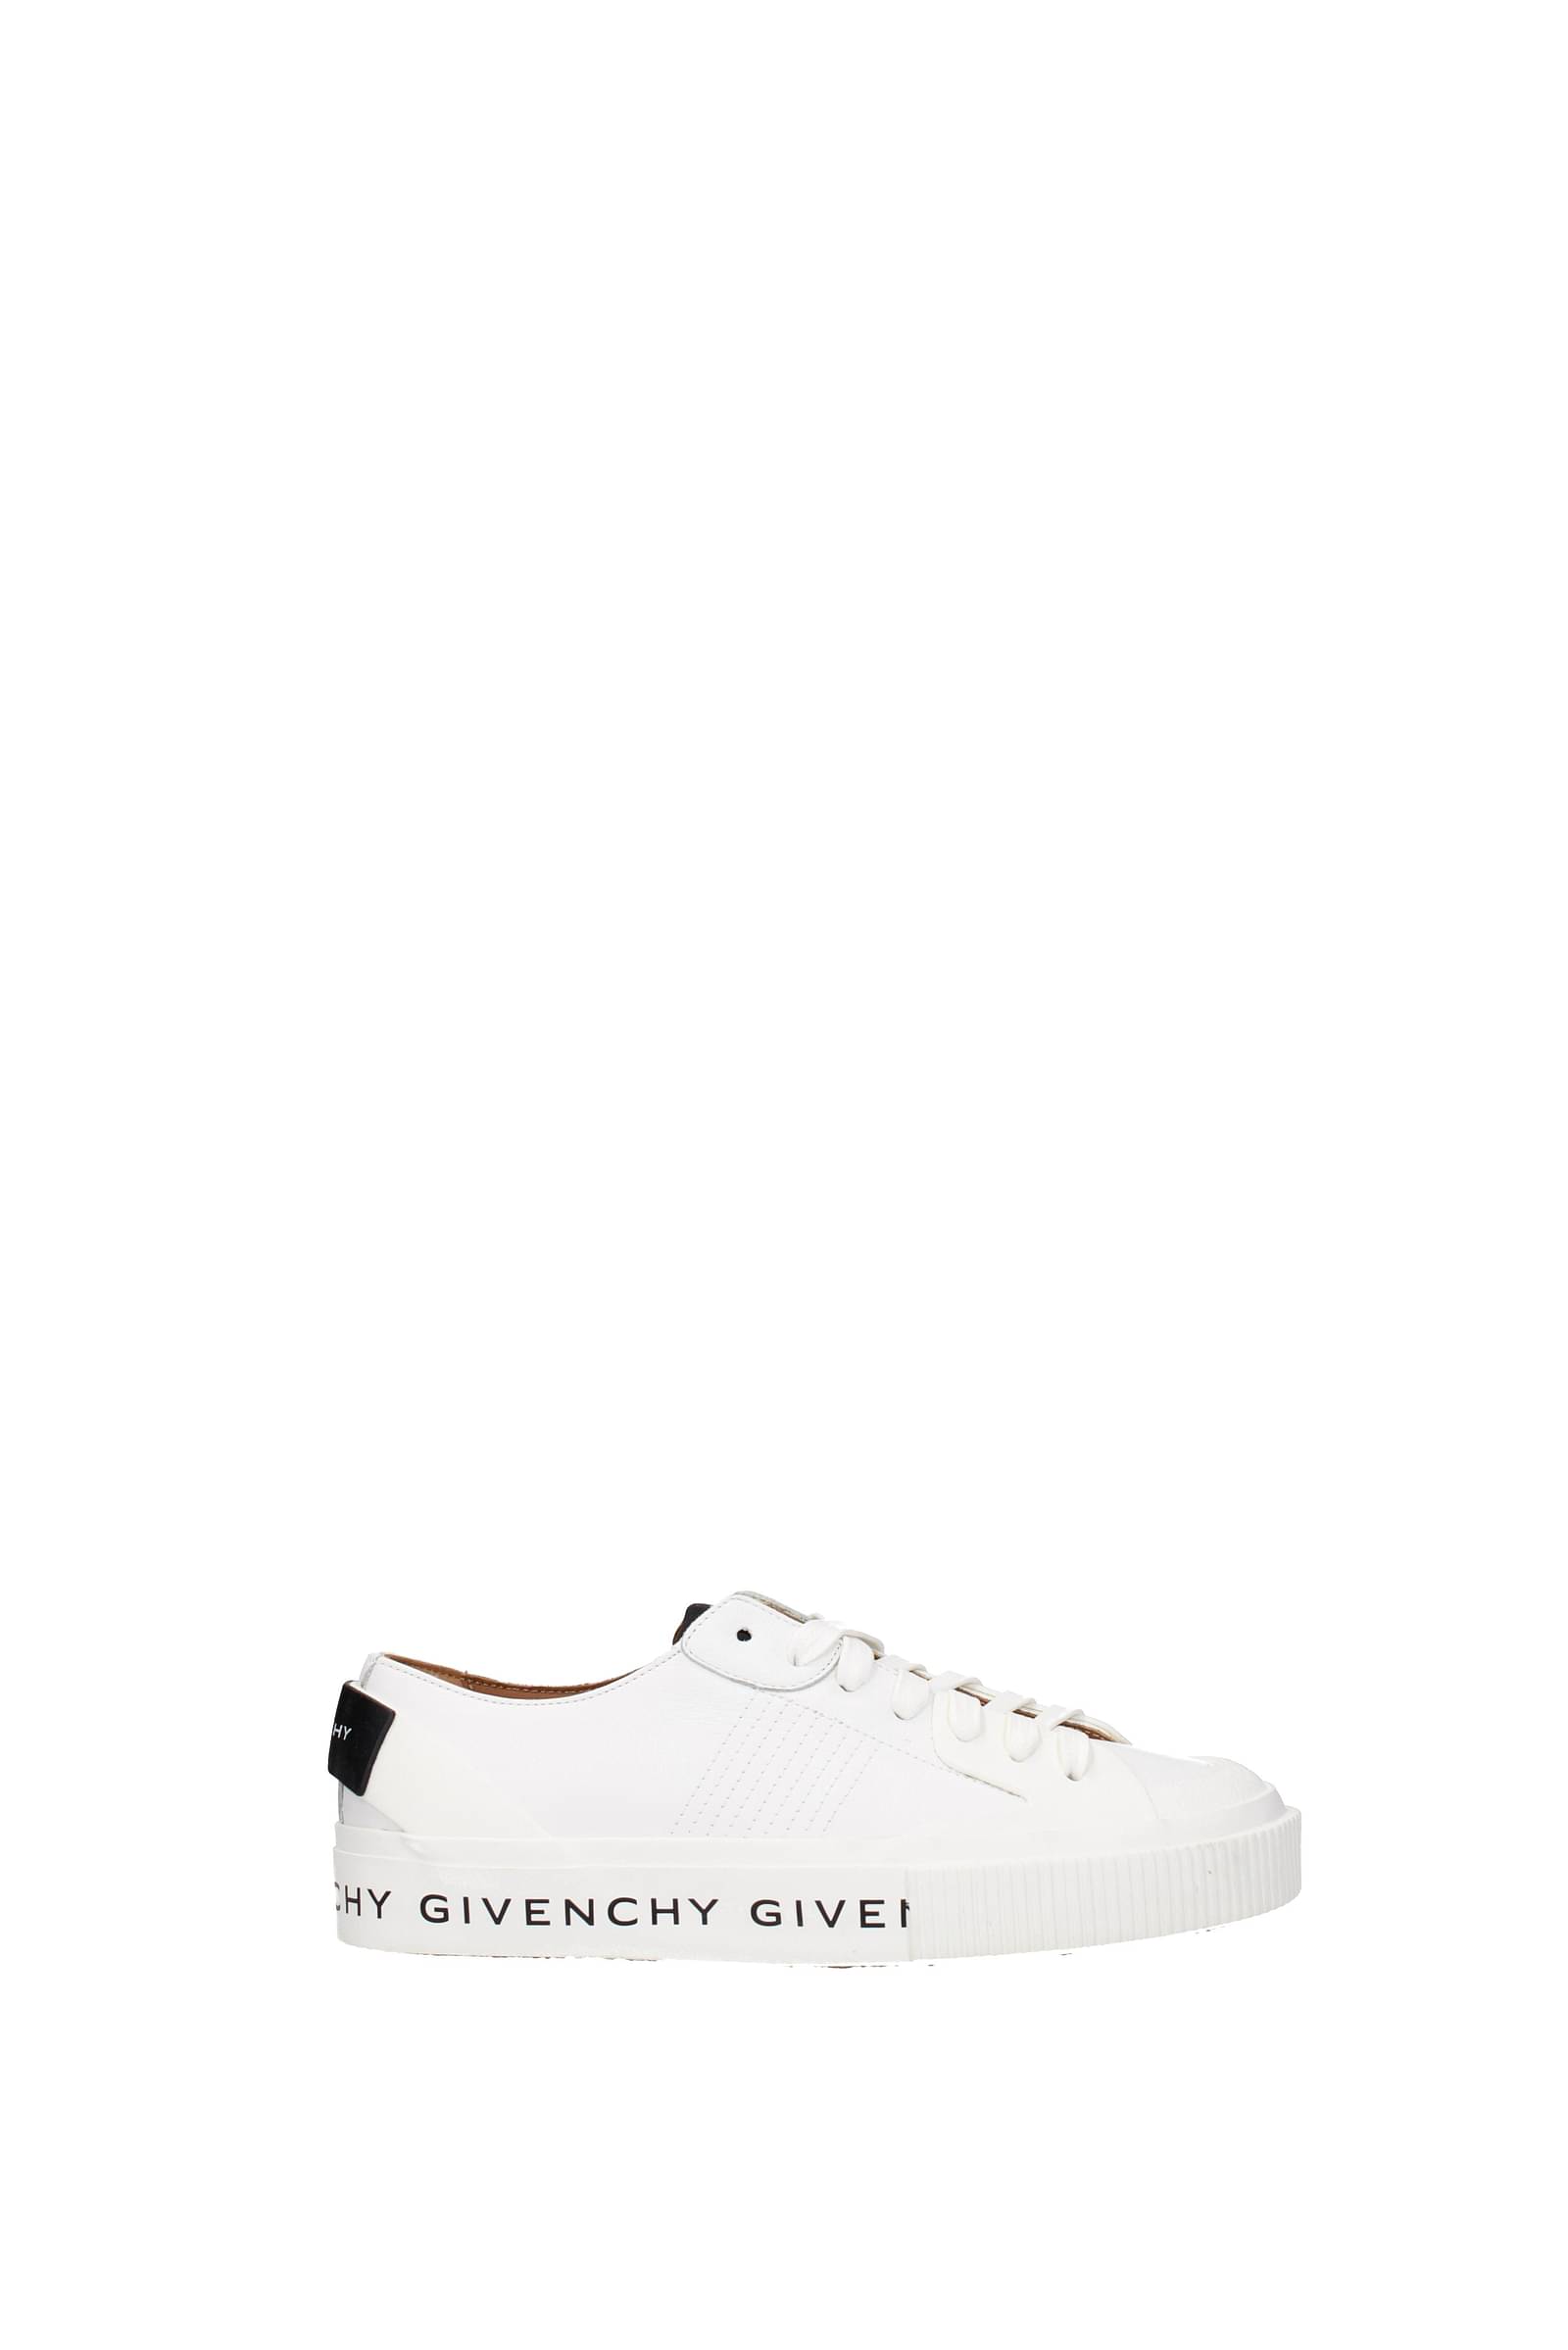 givenchy-sneakers pelle bianco bianco ottico-donna